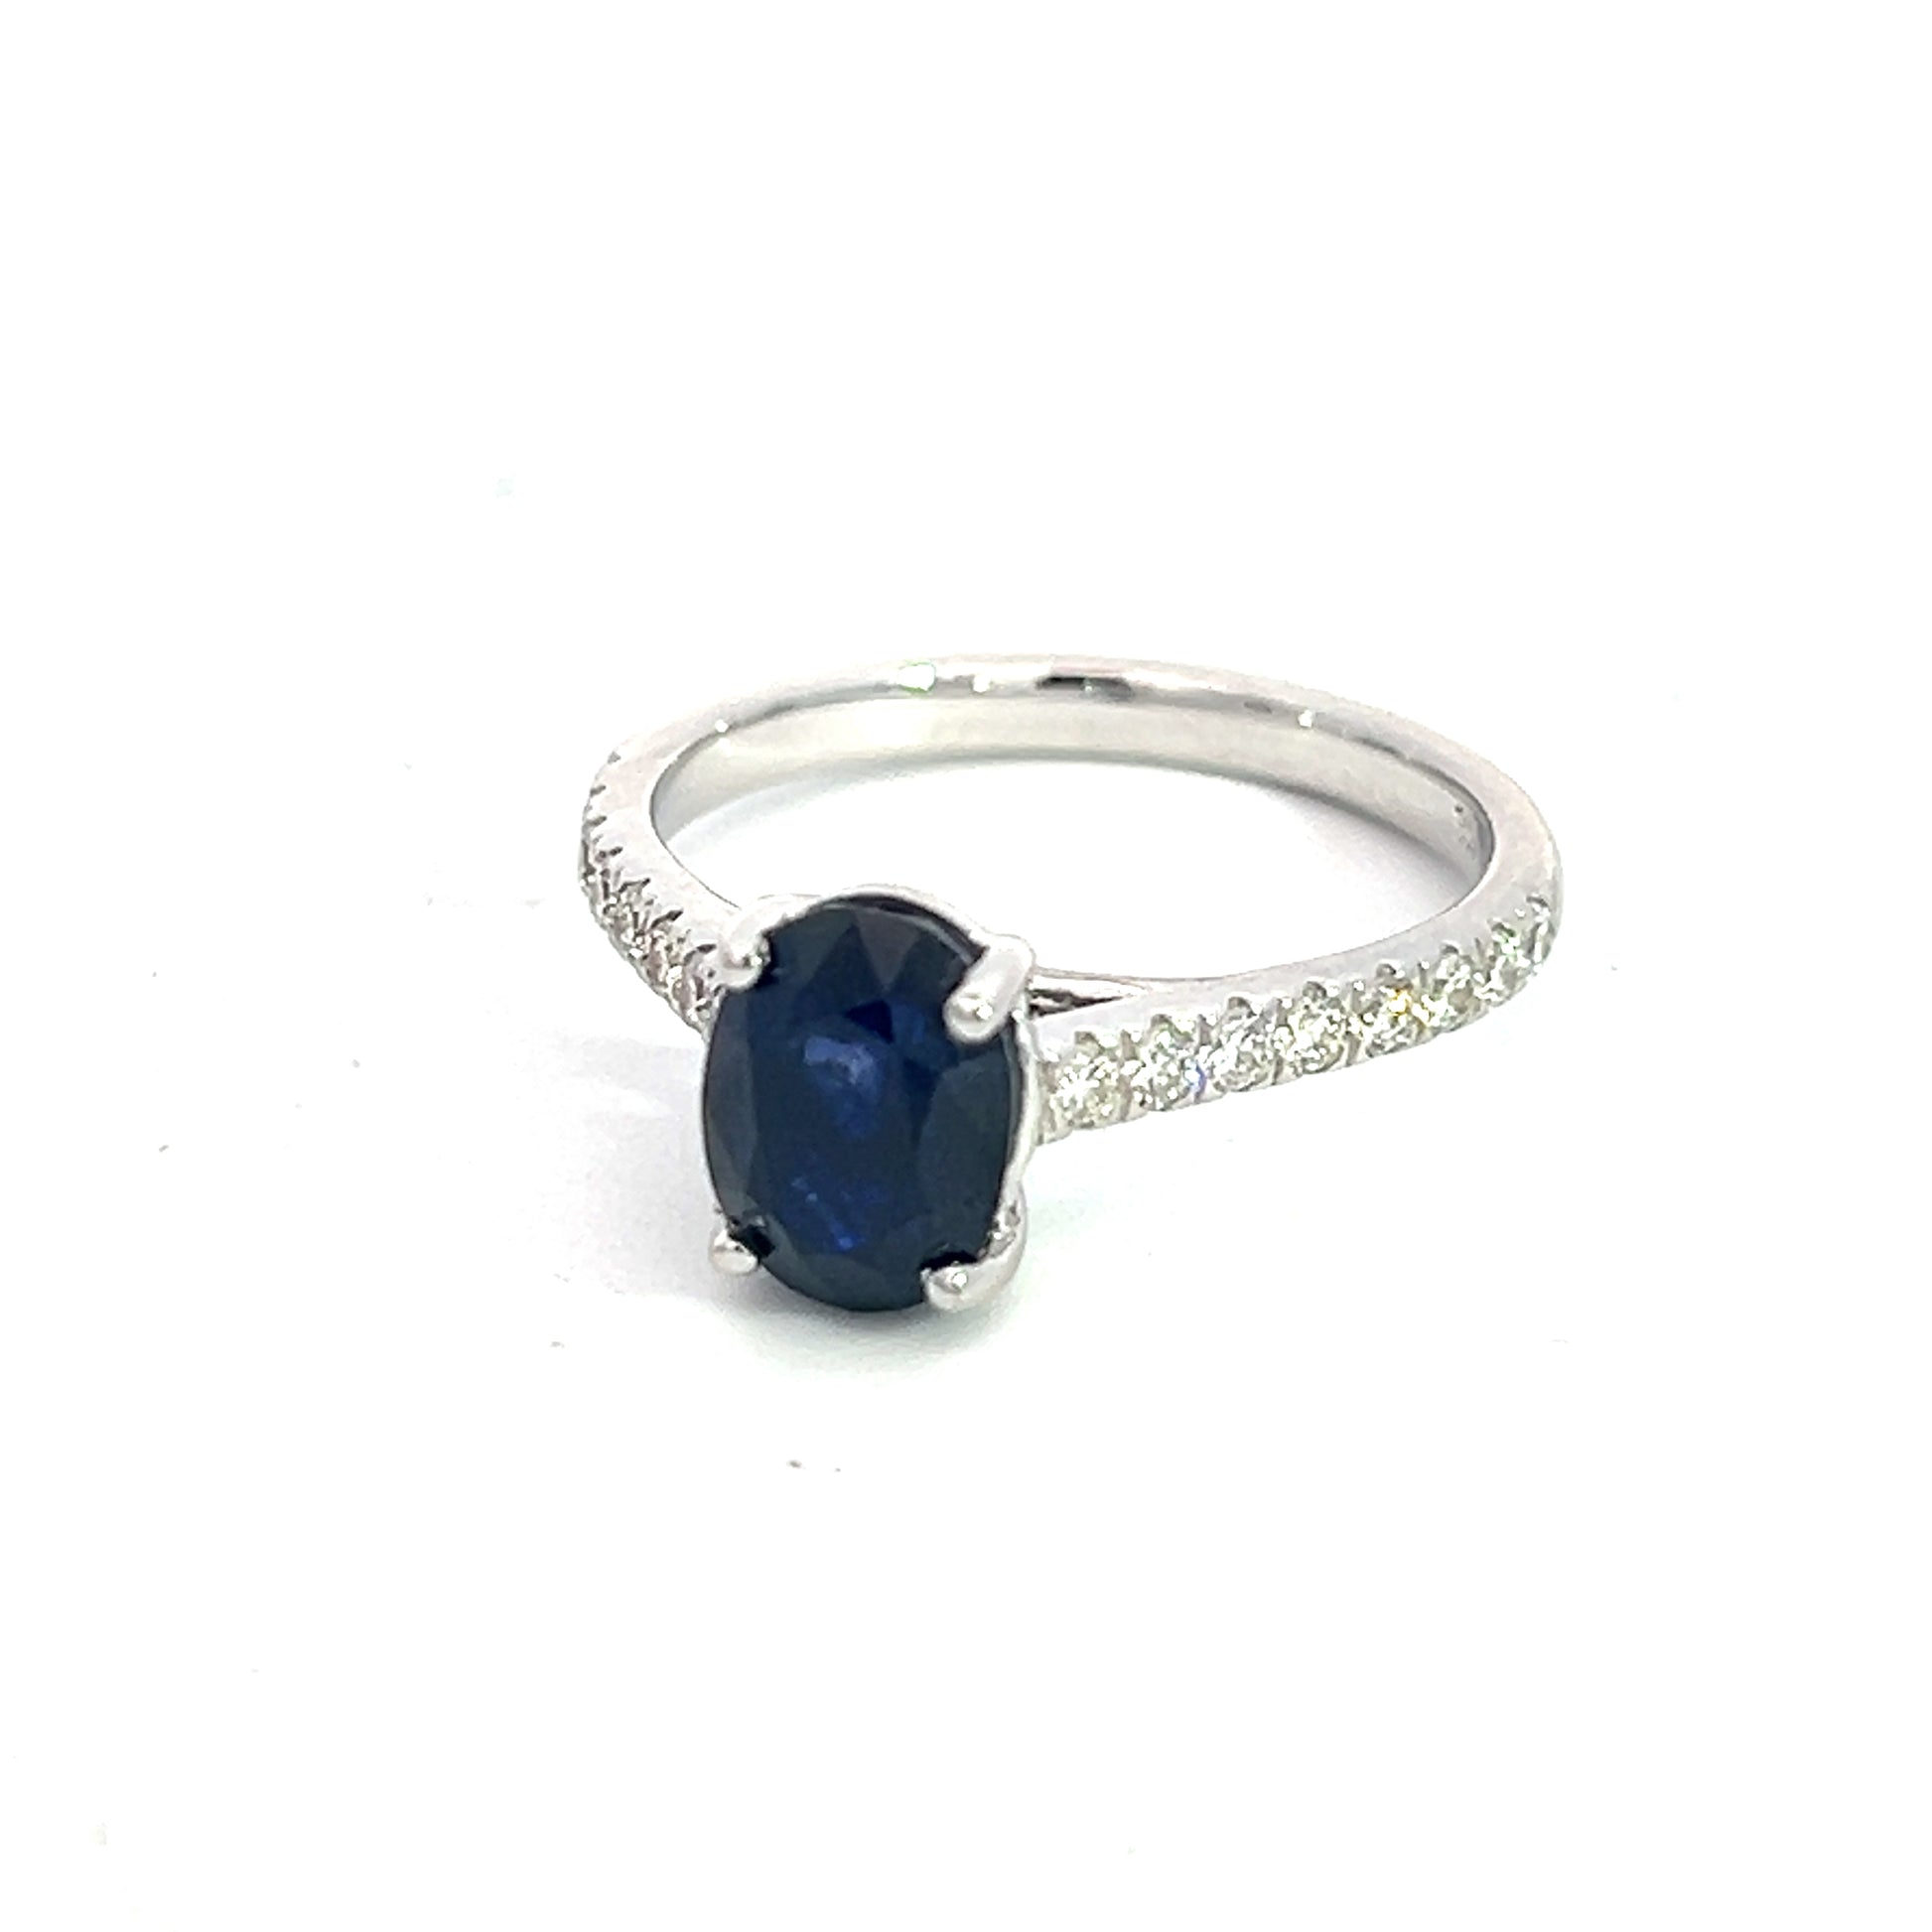 Natural Sapphire Diamond Ring 6.5 14k W Gold 2.35 TCW Certified $3,950 310589